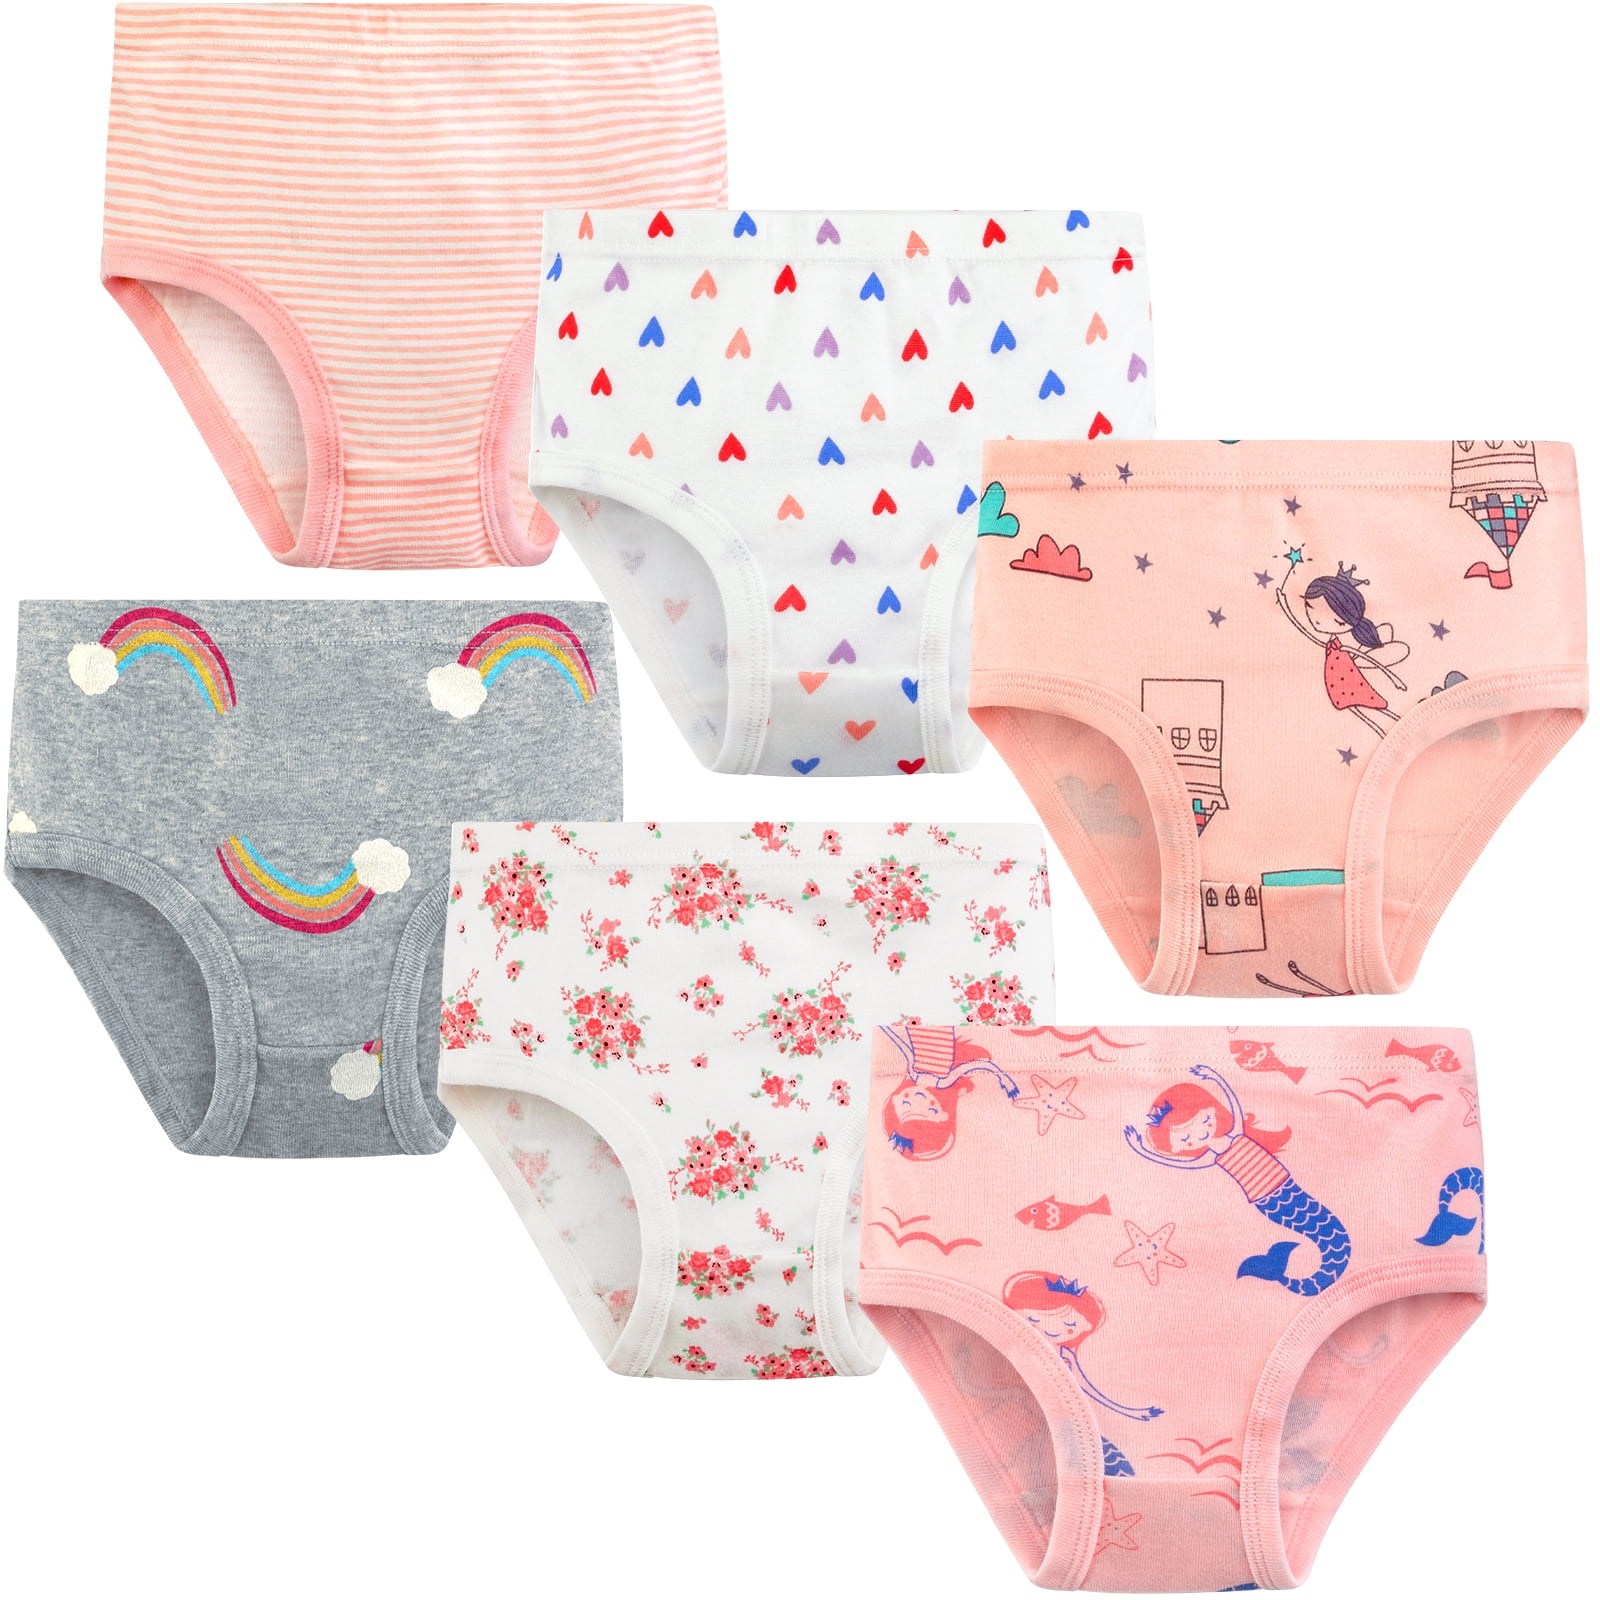 5 Pcs/lot Girls Panties Cotton Kids Beautiful Underwear Cartoon Children Briefs  Girls Breathable Triangle Underpants For Girls Color: 5-20GS003, Kid Size:  L (For 5-7 Years)